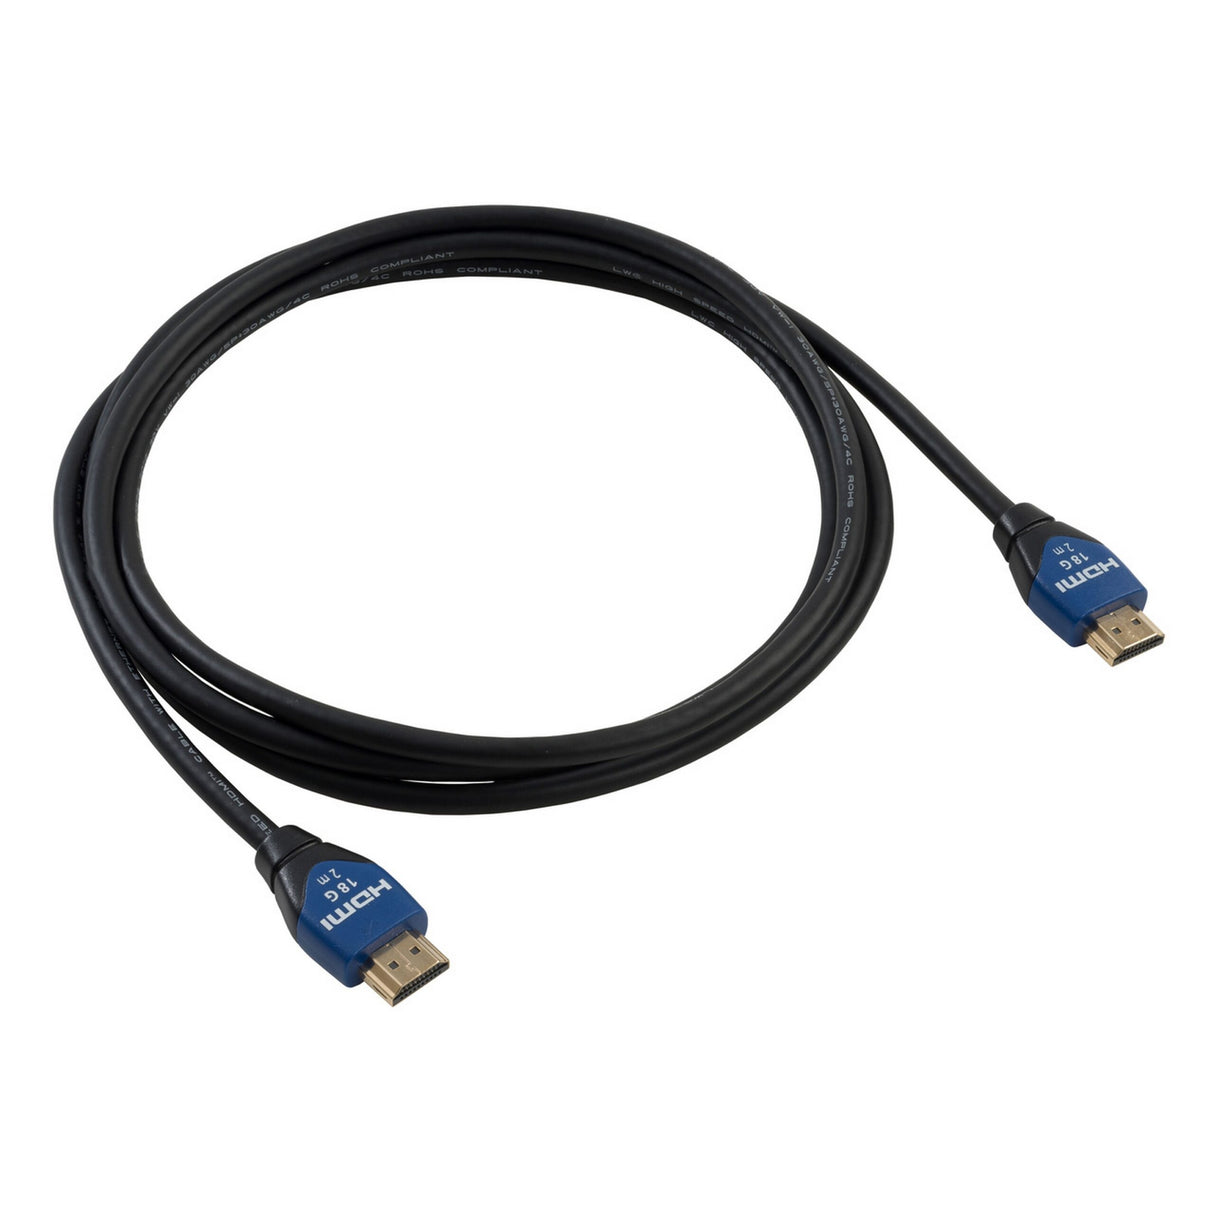 Liberty AV HALO-HC06M 6-Meter HALO Series High Speed HDMI Cable with Ethernet